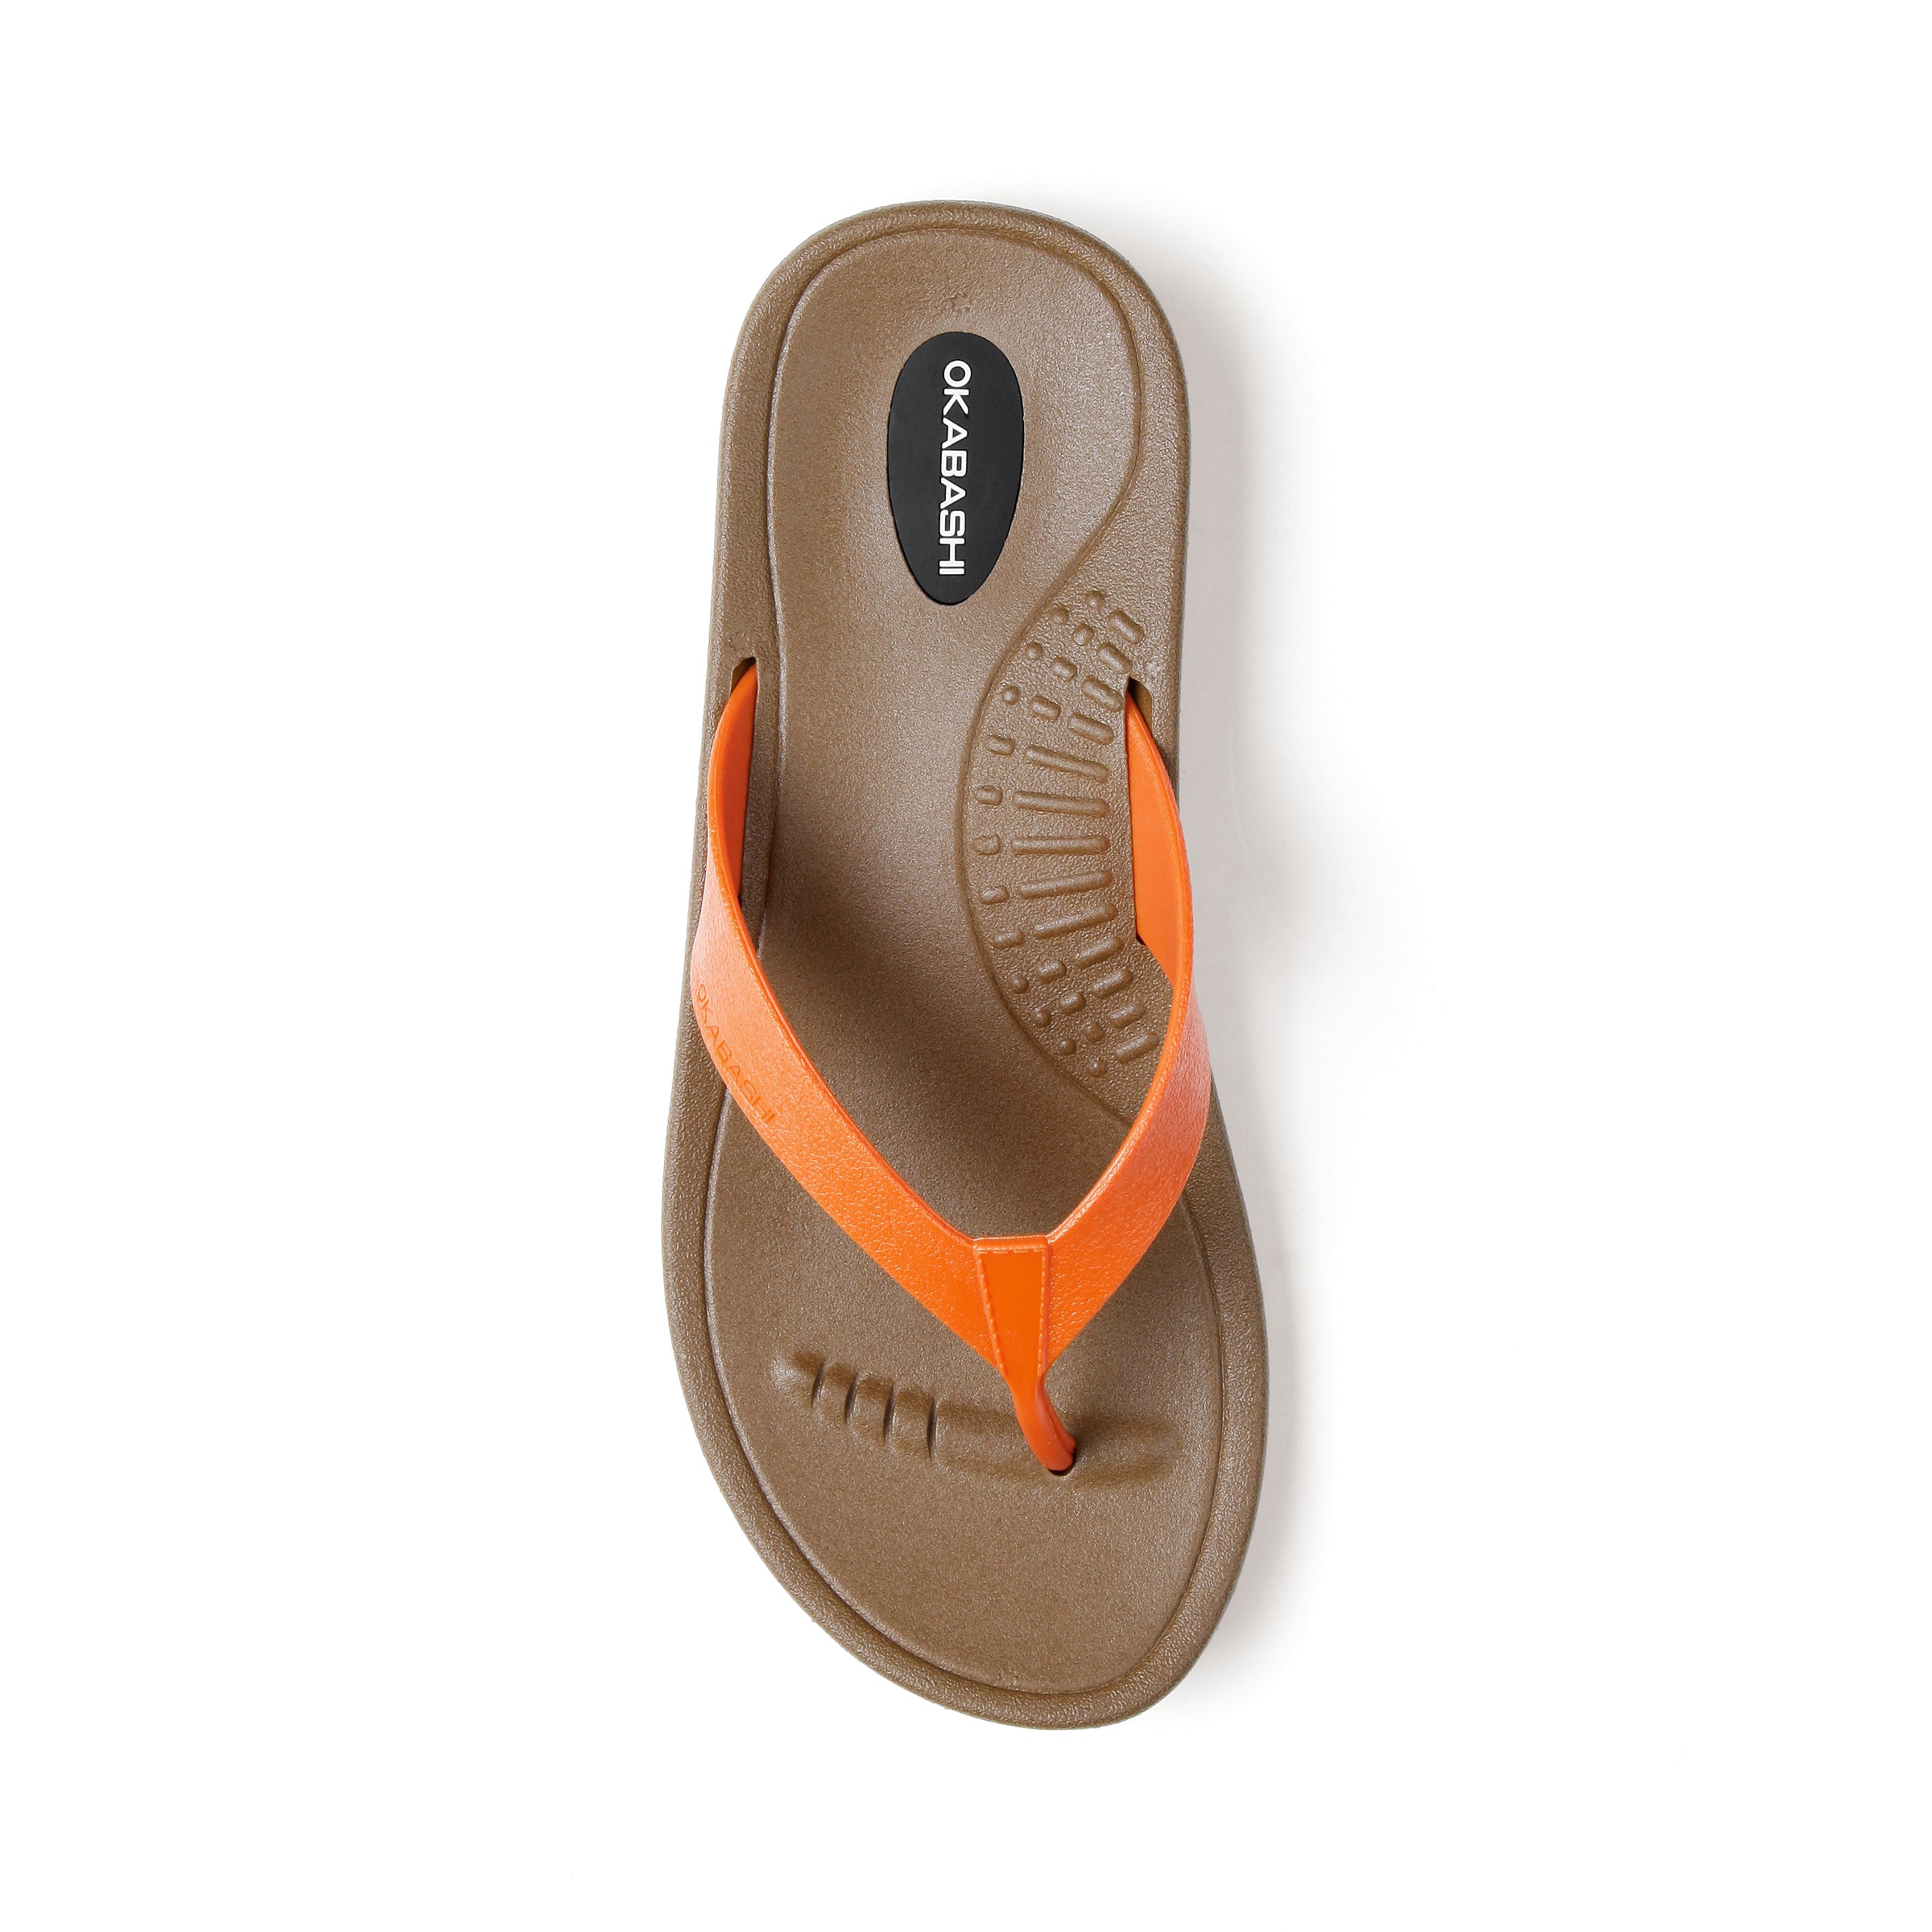 Breeze | Comfortable Women's Flip Flop | Made in the USA | Okabashi Shoes